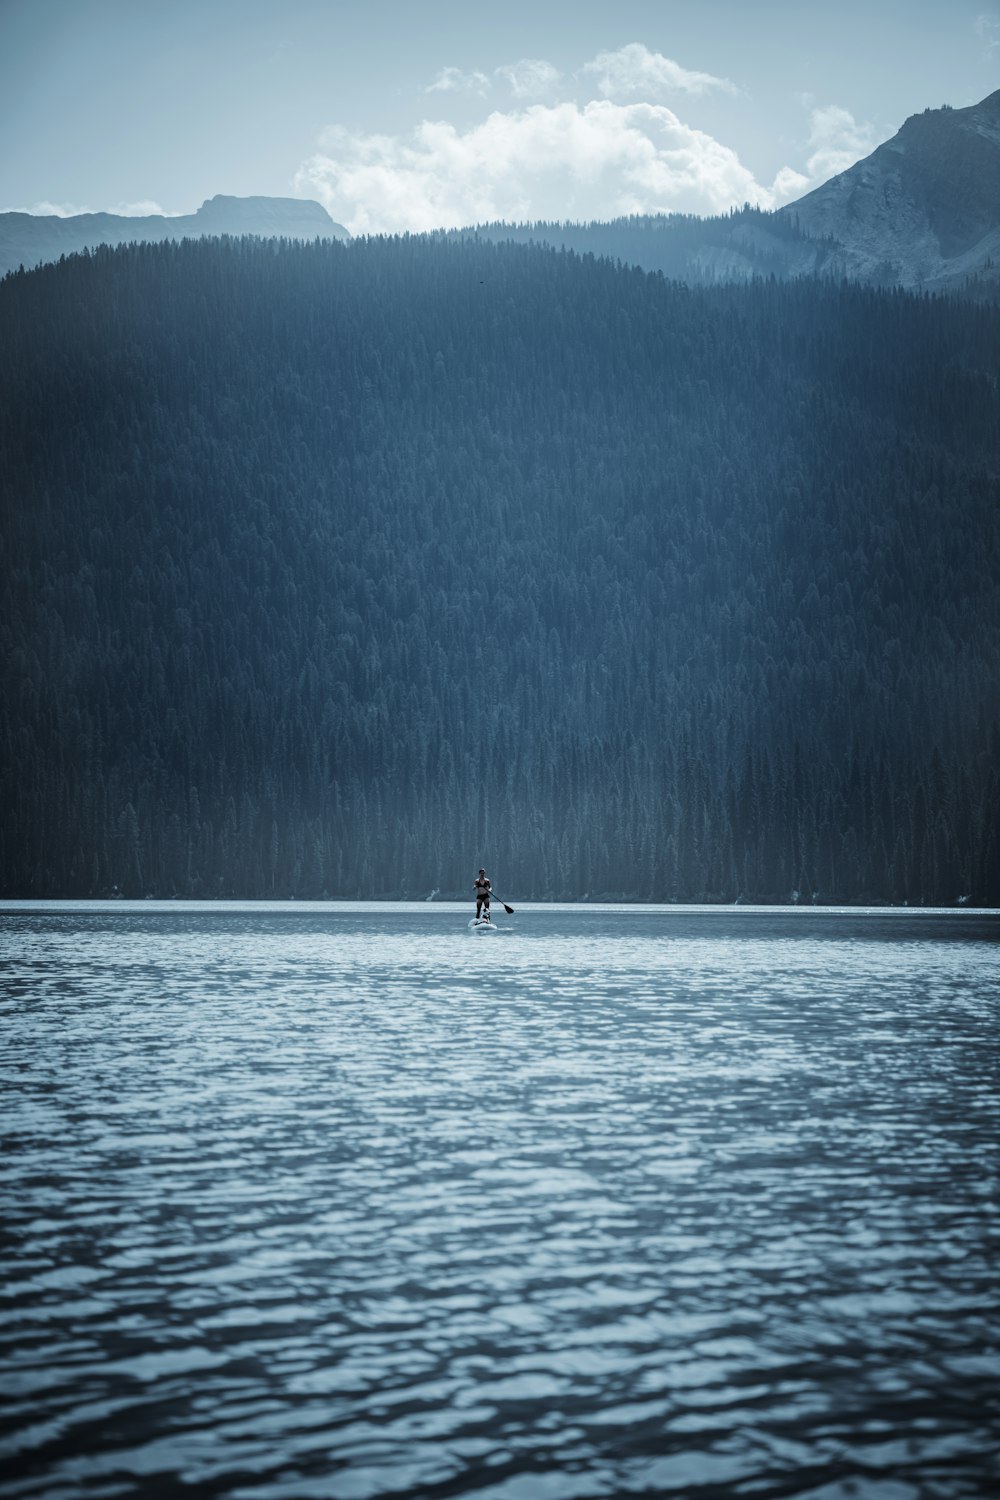 a person on a surfboard in the middle of a lake